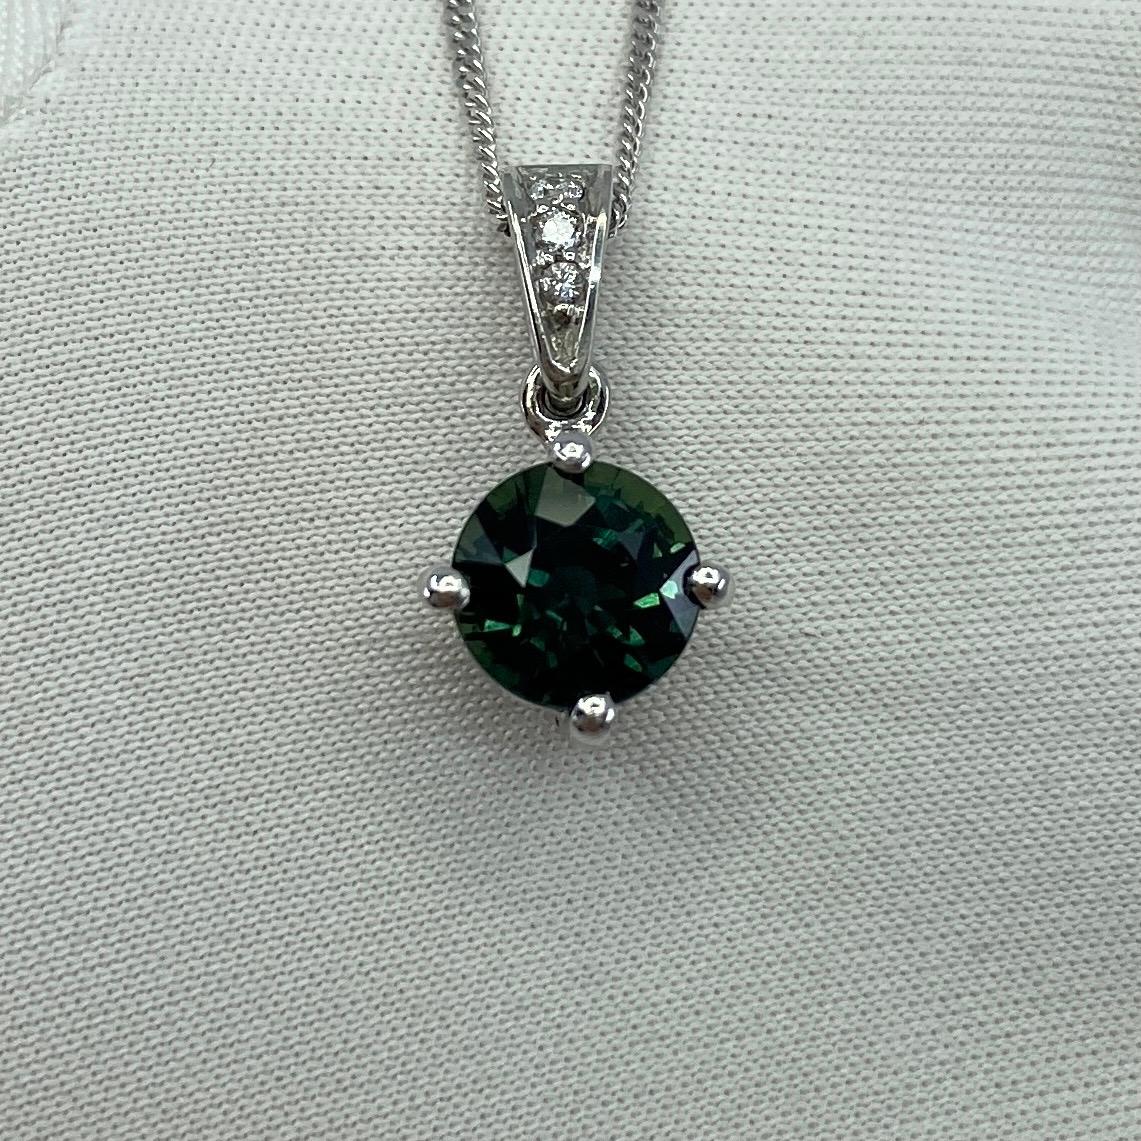 Fine Teal Blue-Green Australian Sapphire & Diamond Platinum Pendant.

1.56 Carat round cut sapphire with a stunning deep blue green 'teal' colour and excellent clarity. Very clean stone practically flawless.
This sapphire also has an excellent round